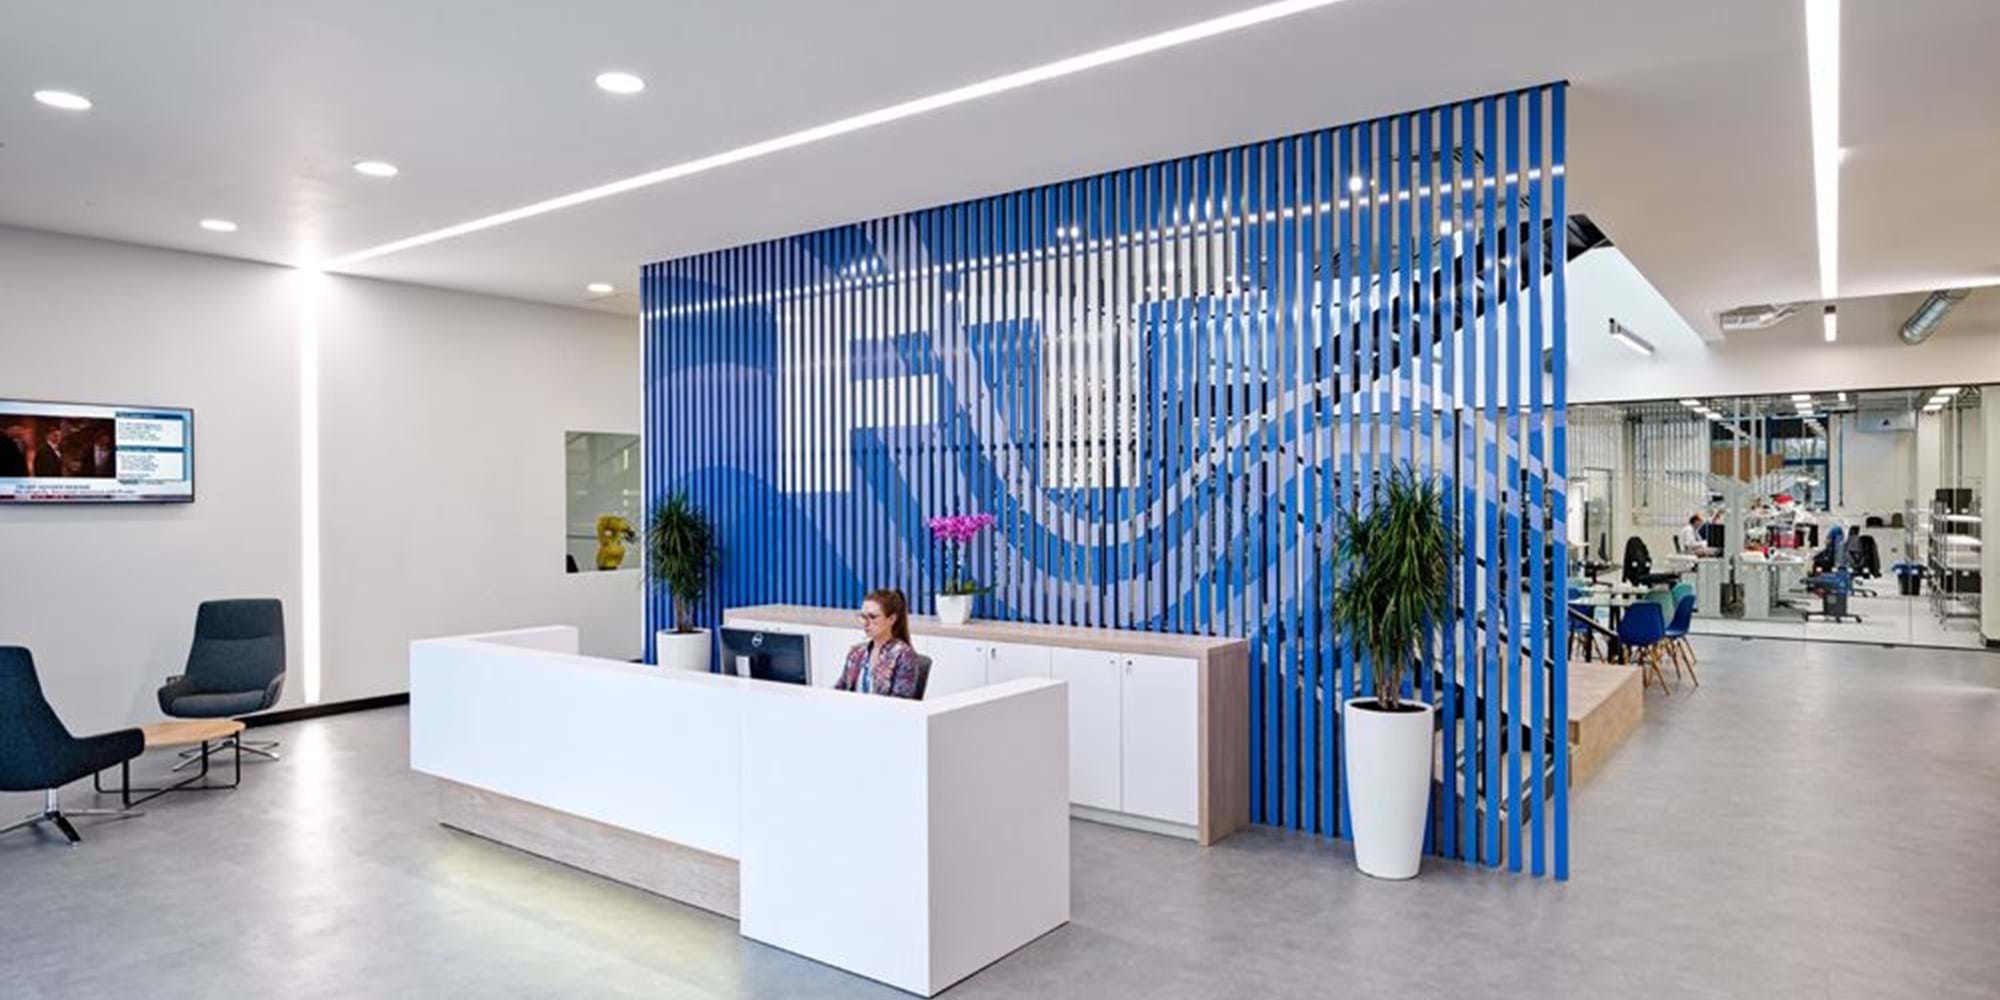 Modus Workspace office design, fit out and refurbishment - FT Technologies - FT Technologies 01 highres sRGB.jpg